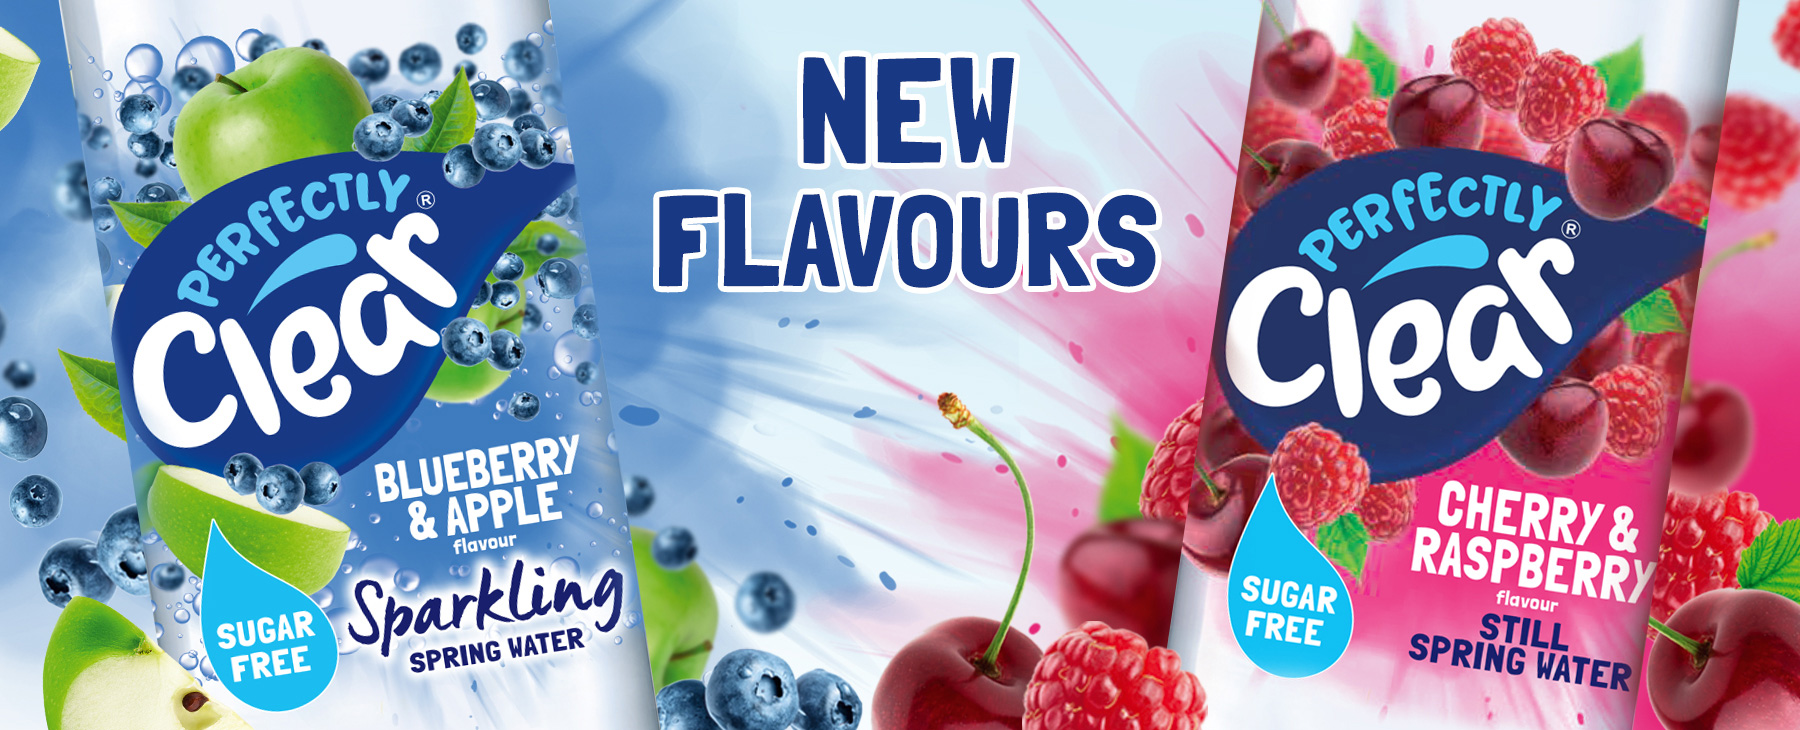 New Perfectly Clear flavours